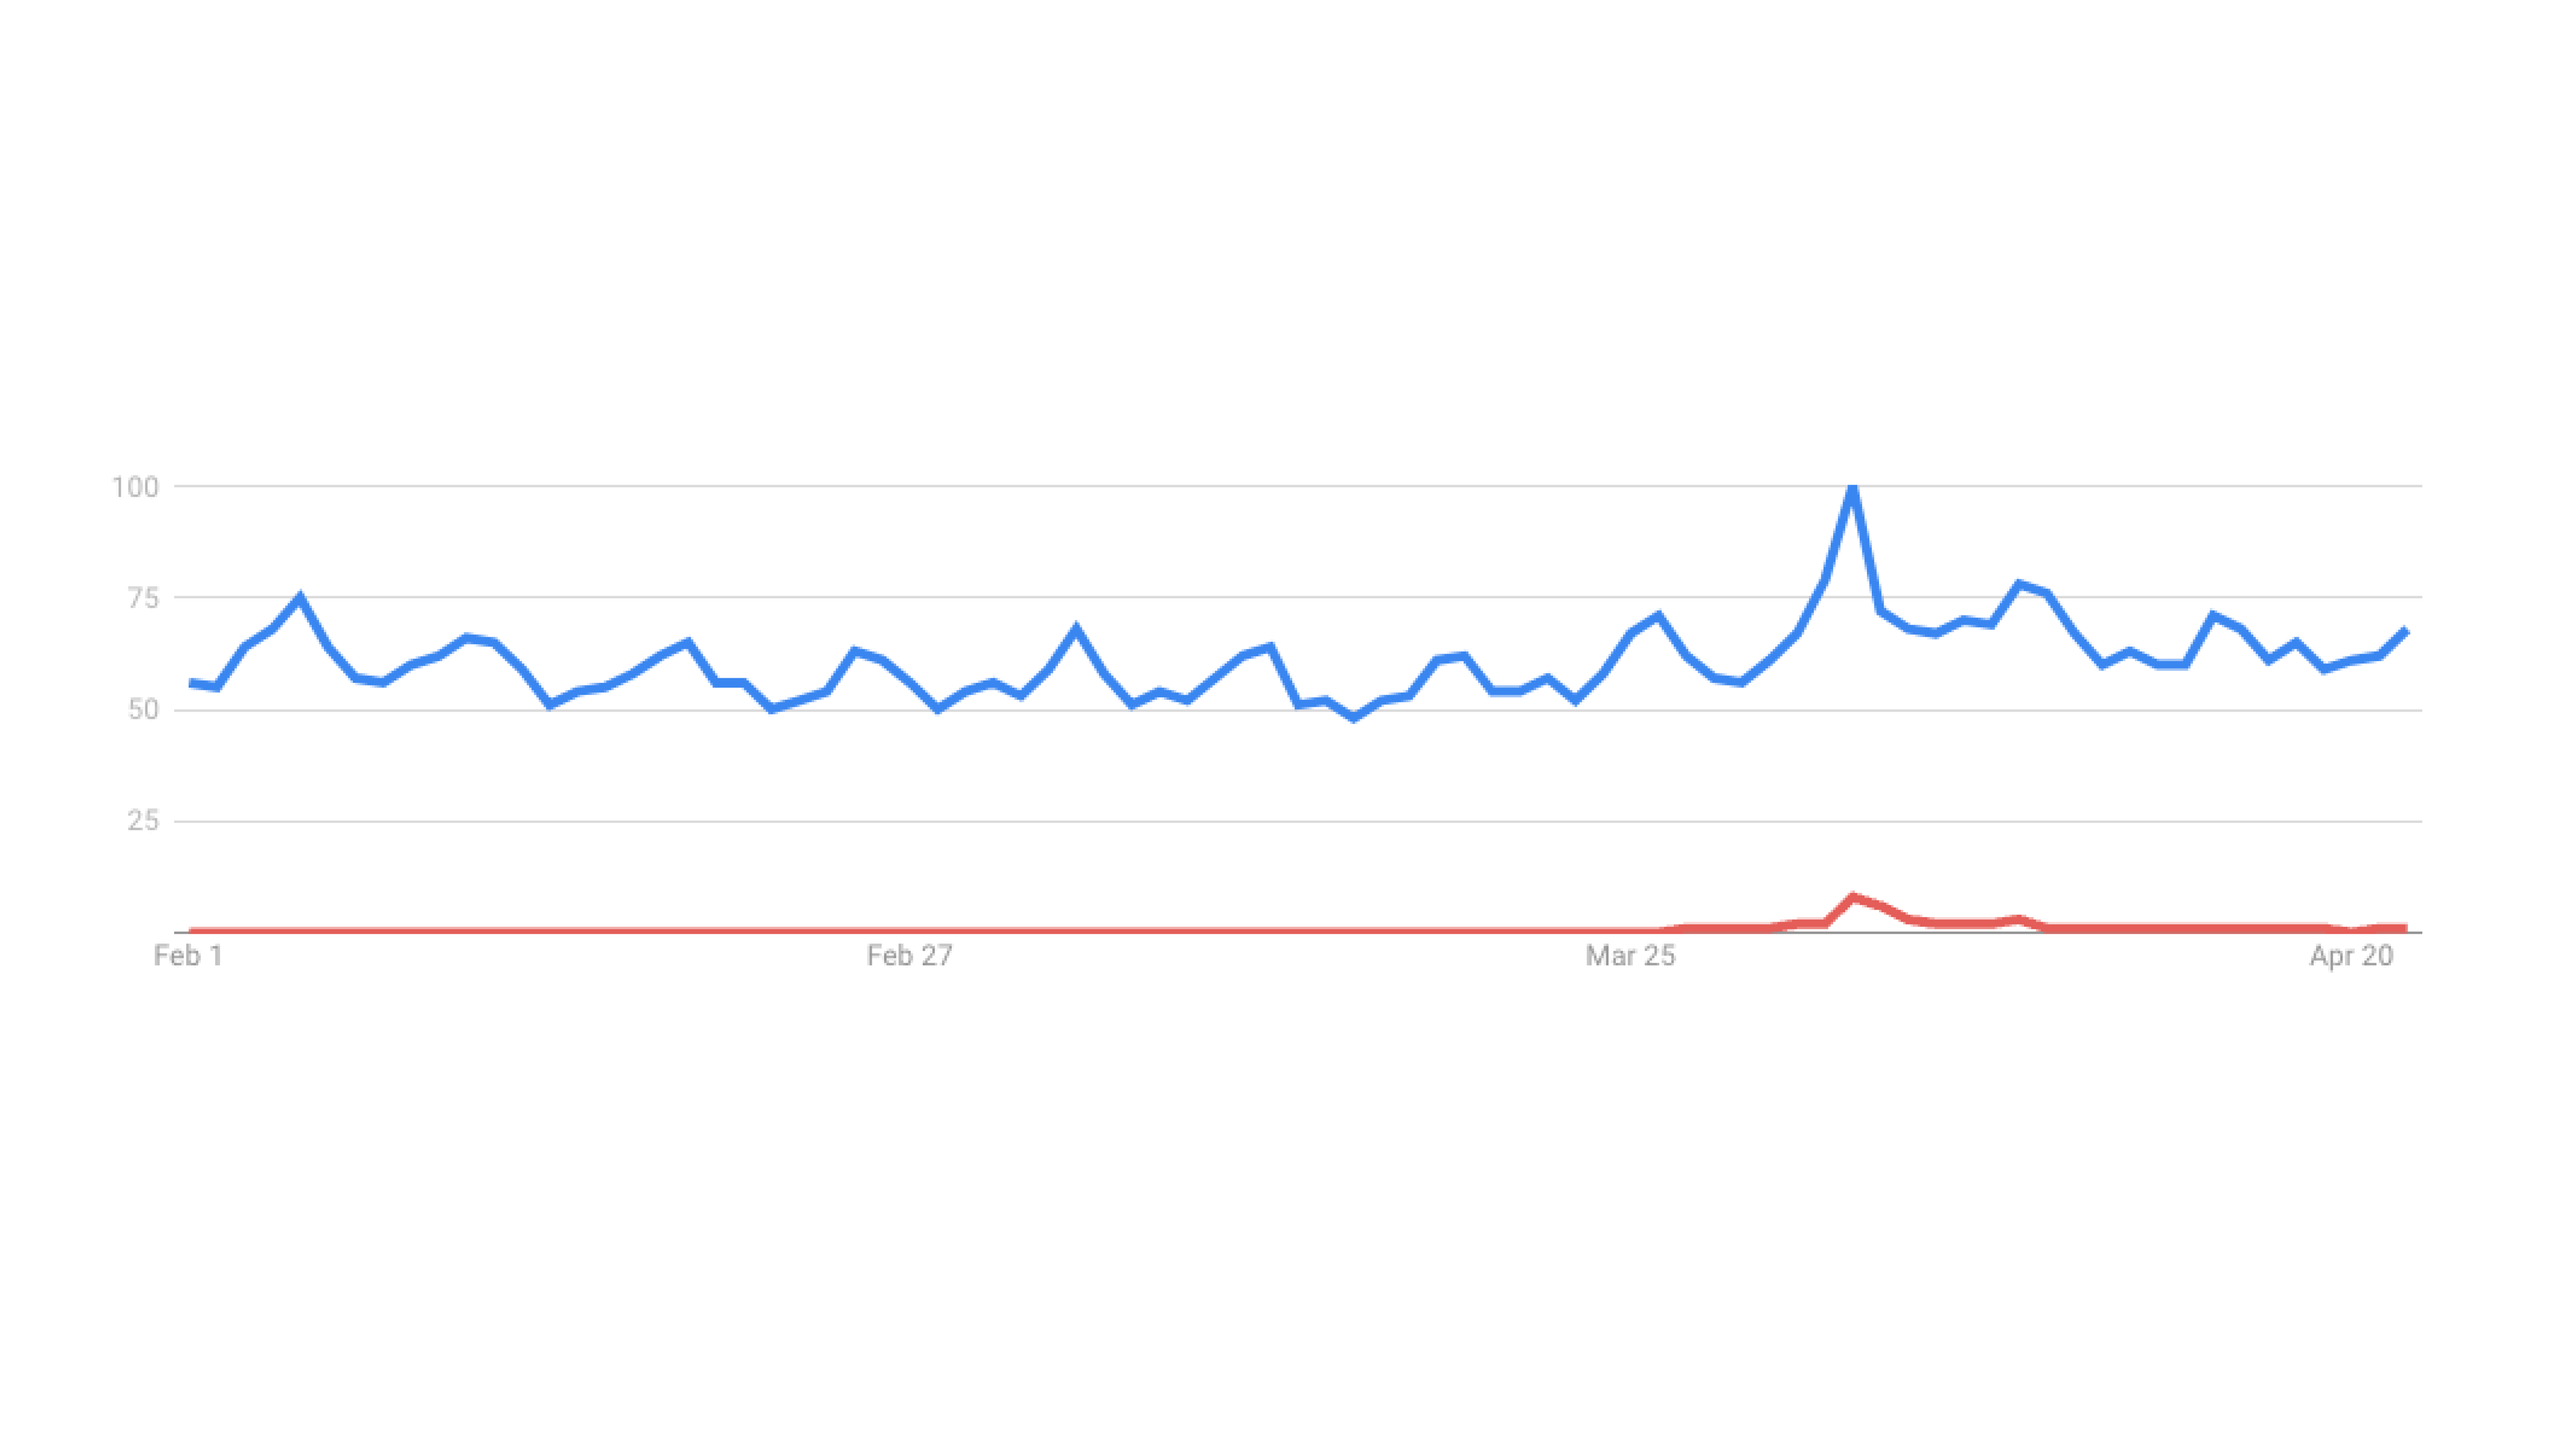 Google Trends graph: the blue line shows a steady trend of searches for “Balenciaga” from 1st Feb, until early April when the search peaked. Below, the red line shows zero searches for “Balenciaga Harry Potter”, until the same point in April when this search term also spiked, thus demonstrating this activity increased the interest in the brand.